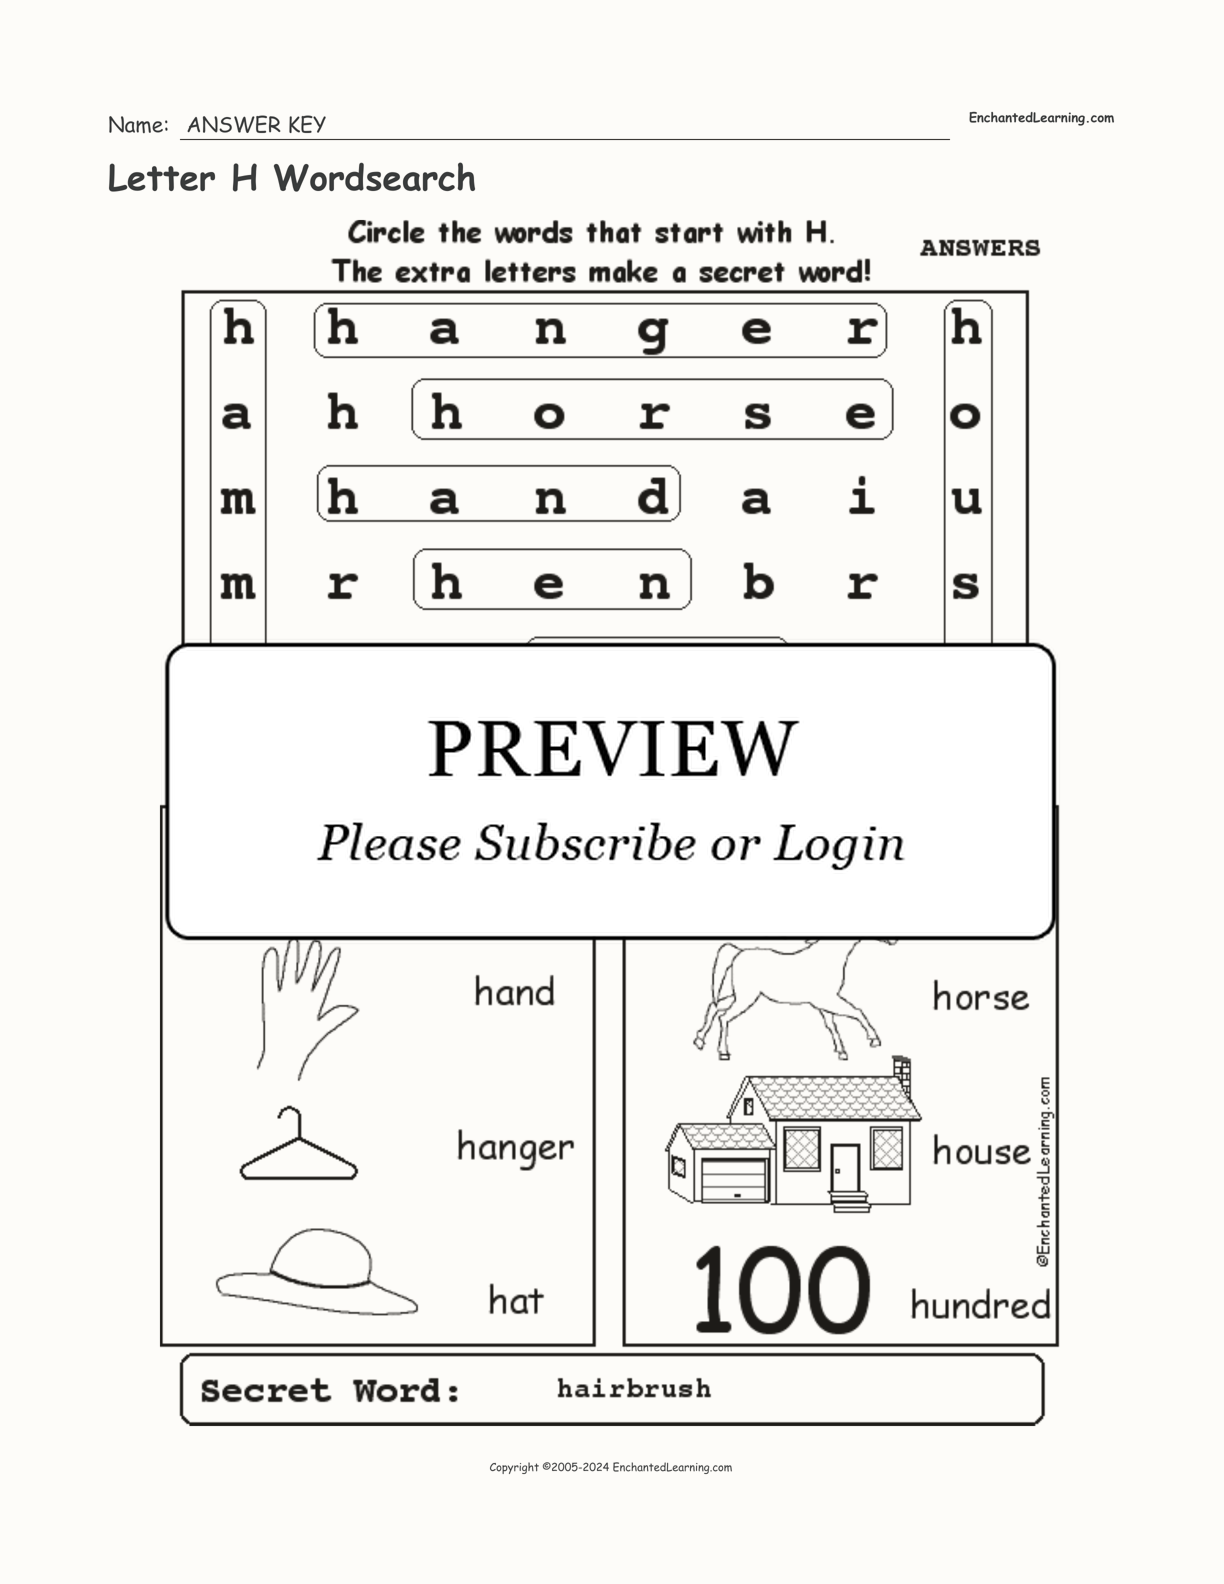 Letter H Wordsearch interactive worksheet page 2